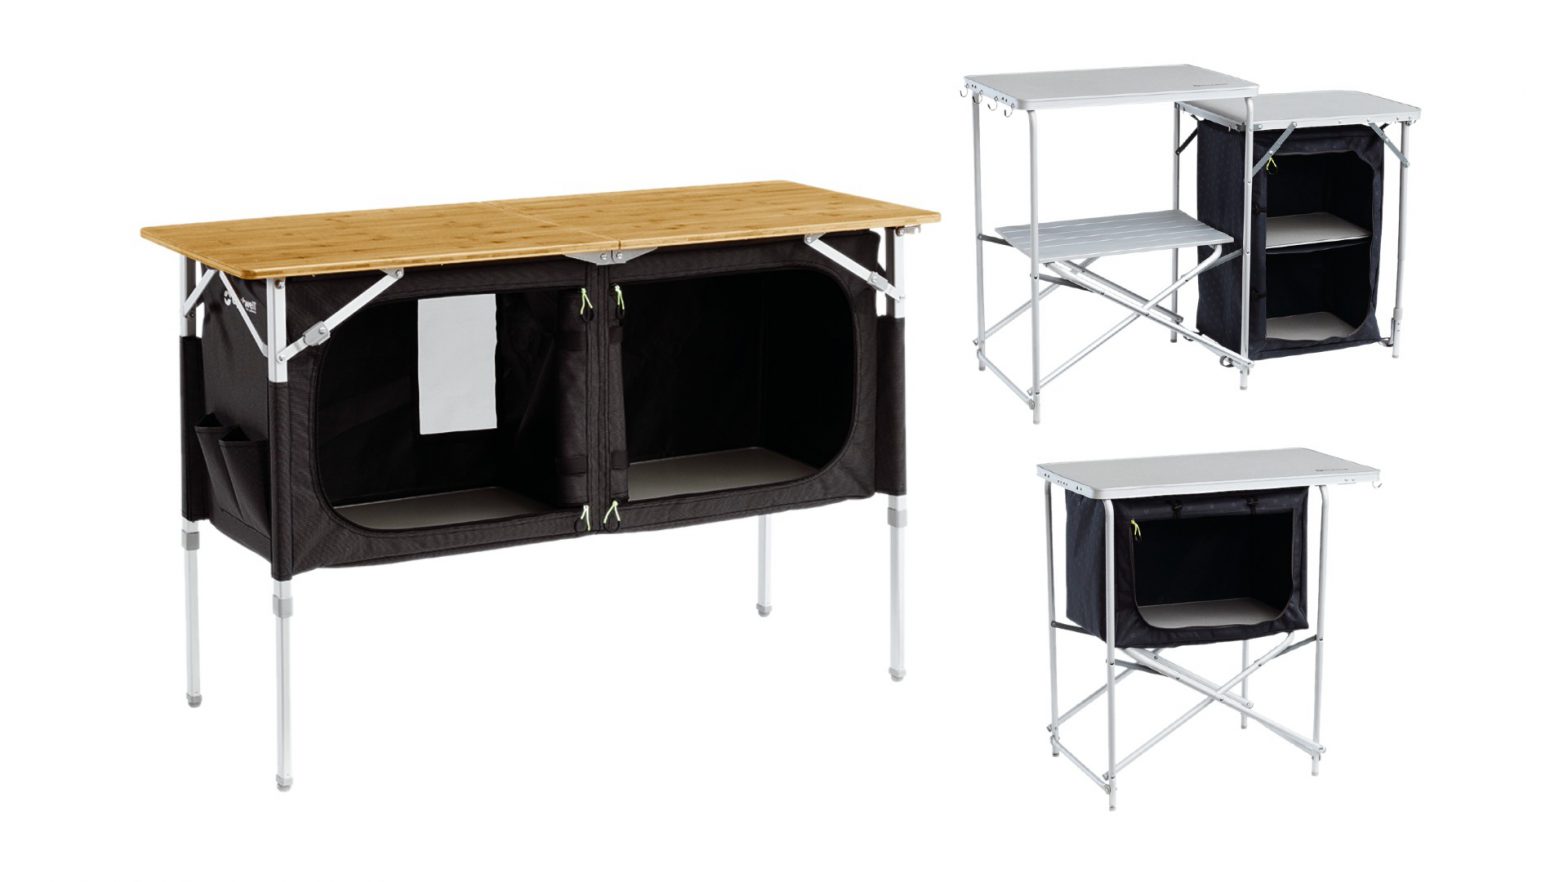 New Outwell Camping Furniture - kitchen tables 2020